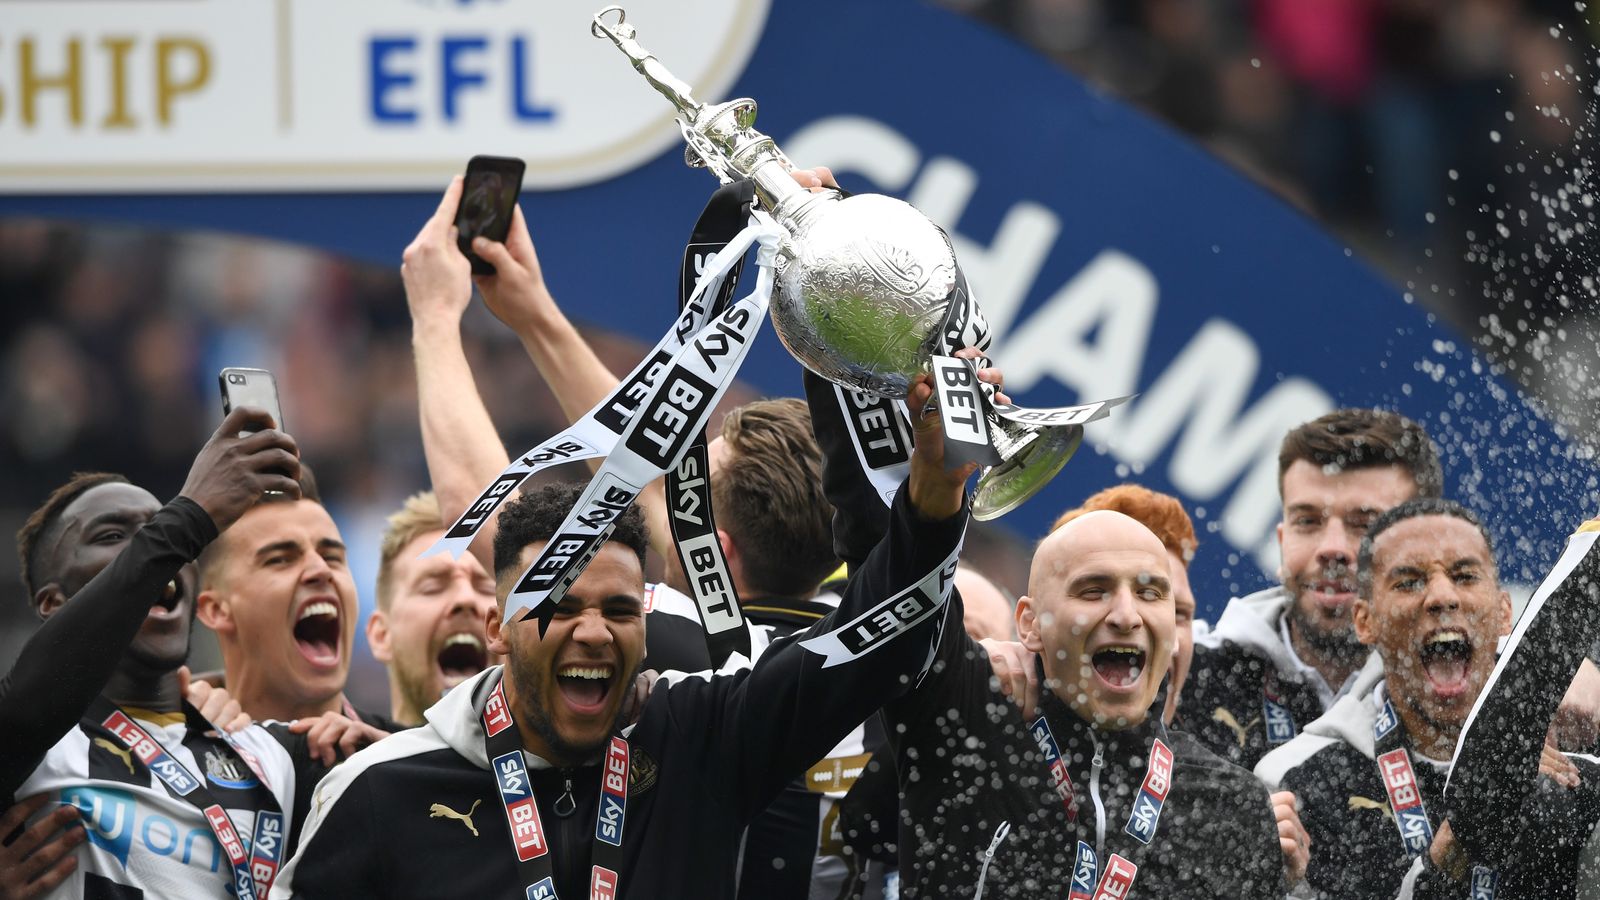 WATCH Newcastle's title celebrations after dramatic final day in the